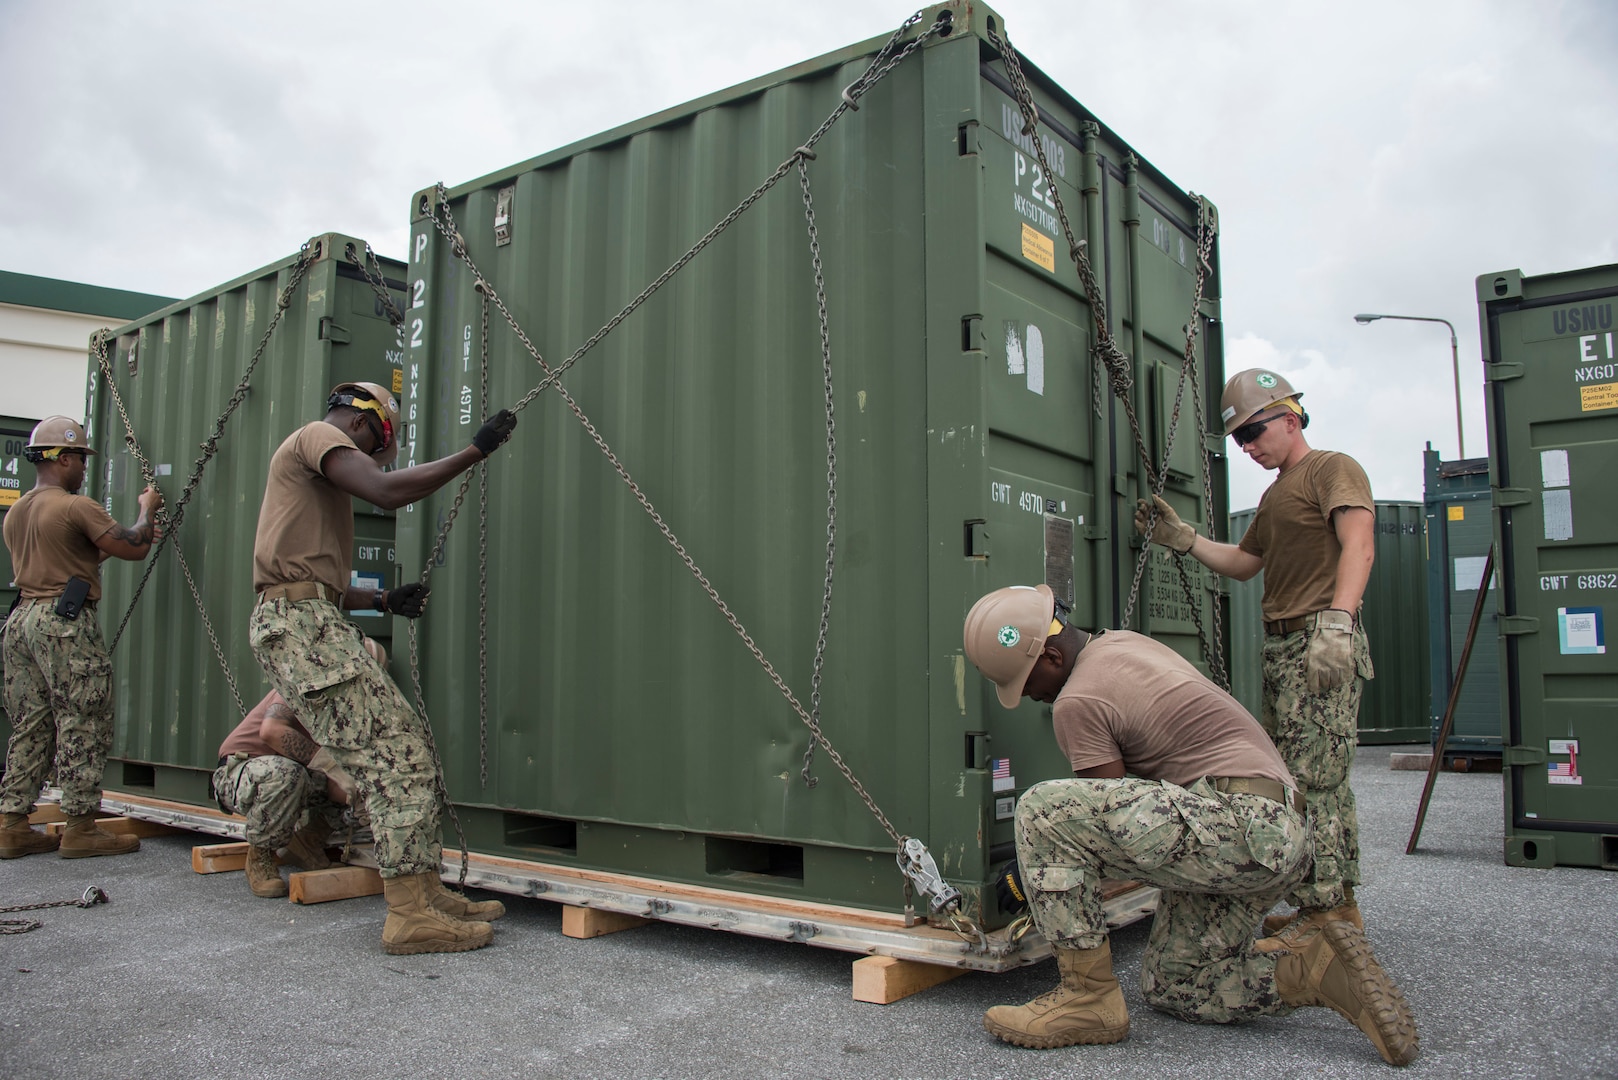 Seabees assigned to Naval Mobile Construction Battalion (NMCB) 5, chain a container to a pallet during a 48-hour Mount-Out Exercise (MOX) in Okinawa, Japan June 19. The MOX simulates one of the core capabilities of a construction battalion to deploy an air detachment, along with construction equipment, within 48-hours to any required location around the globe. NMCB 5 is forward deployed to execute construction, humanitarian and foreign assistance, and theater security cooperation support of United States Pacific Command.